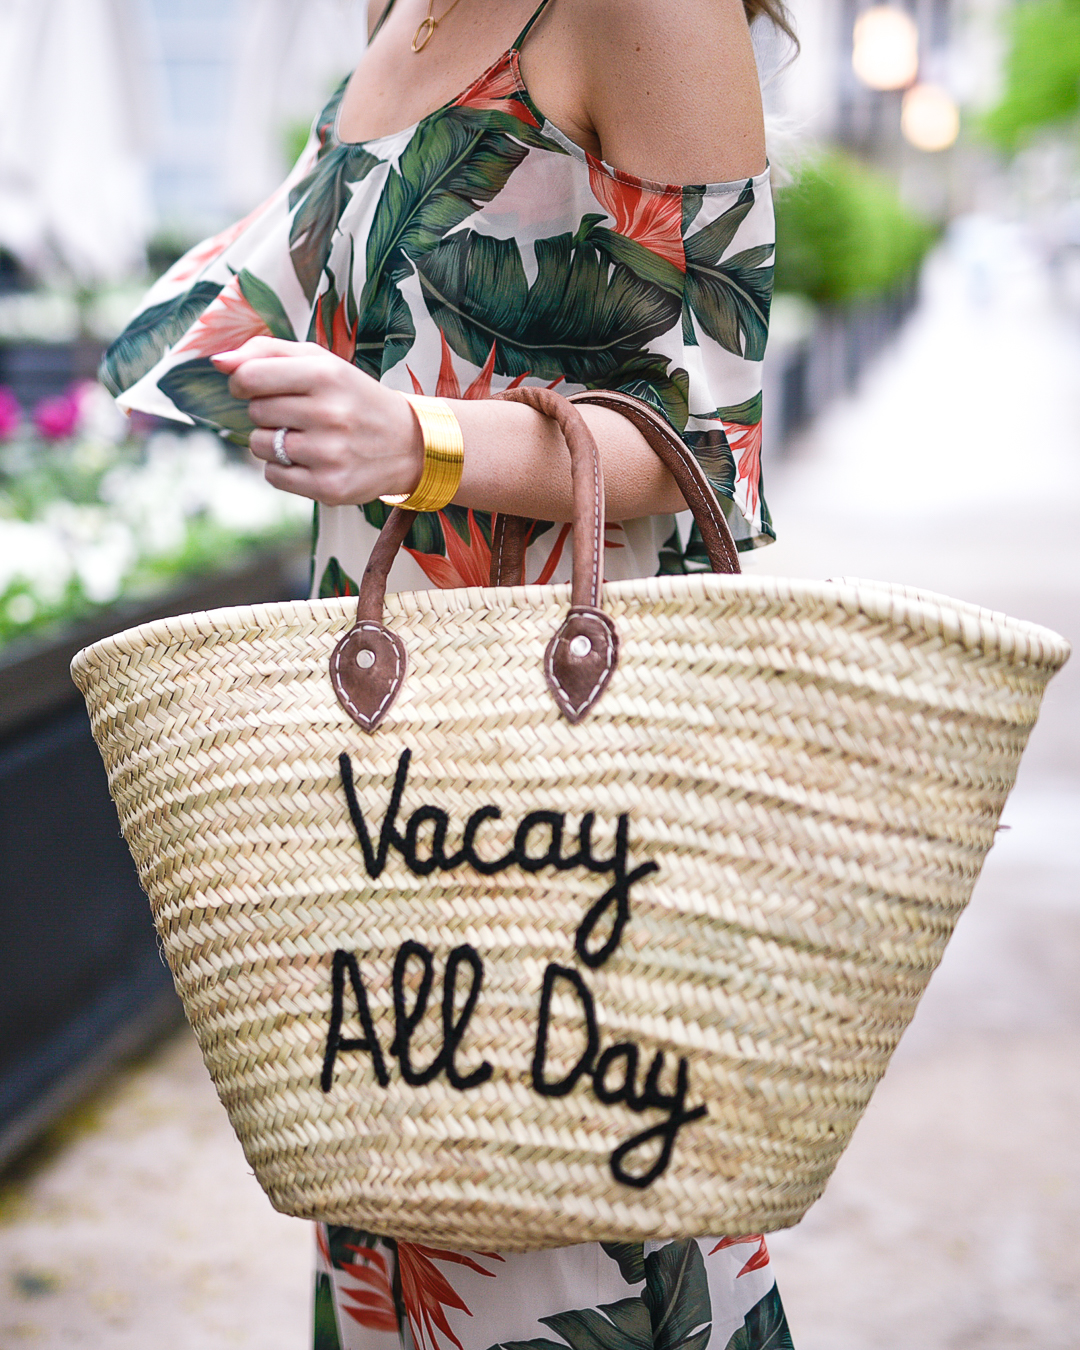 Vacay All Day straw tote bag for the beach.